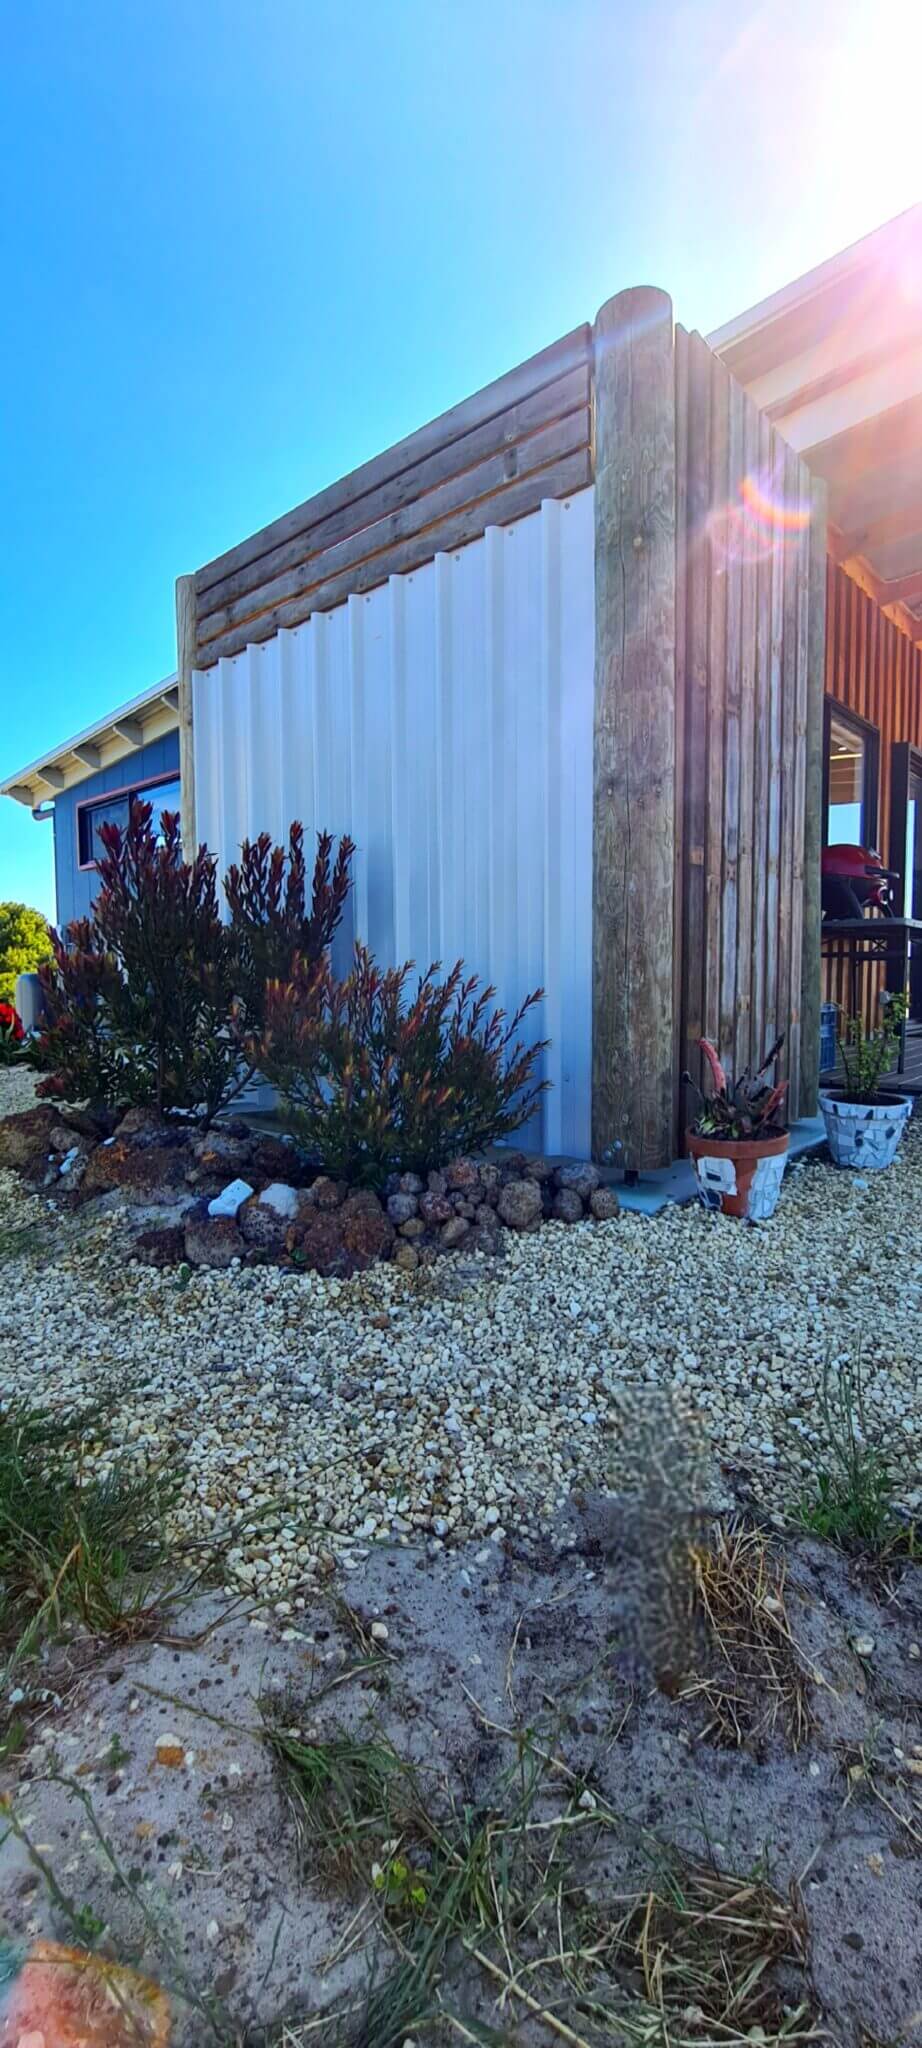 Outside View - Block 785 - Accommodation in Bremer Bay - Lot 785 Freeman Drive Bremer Bay